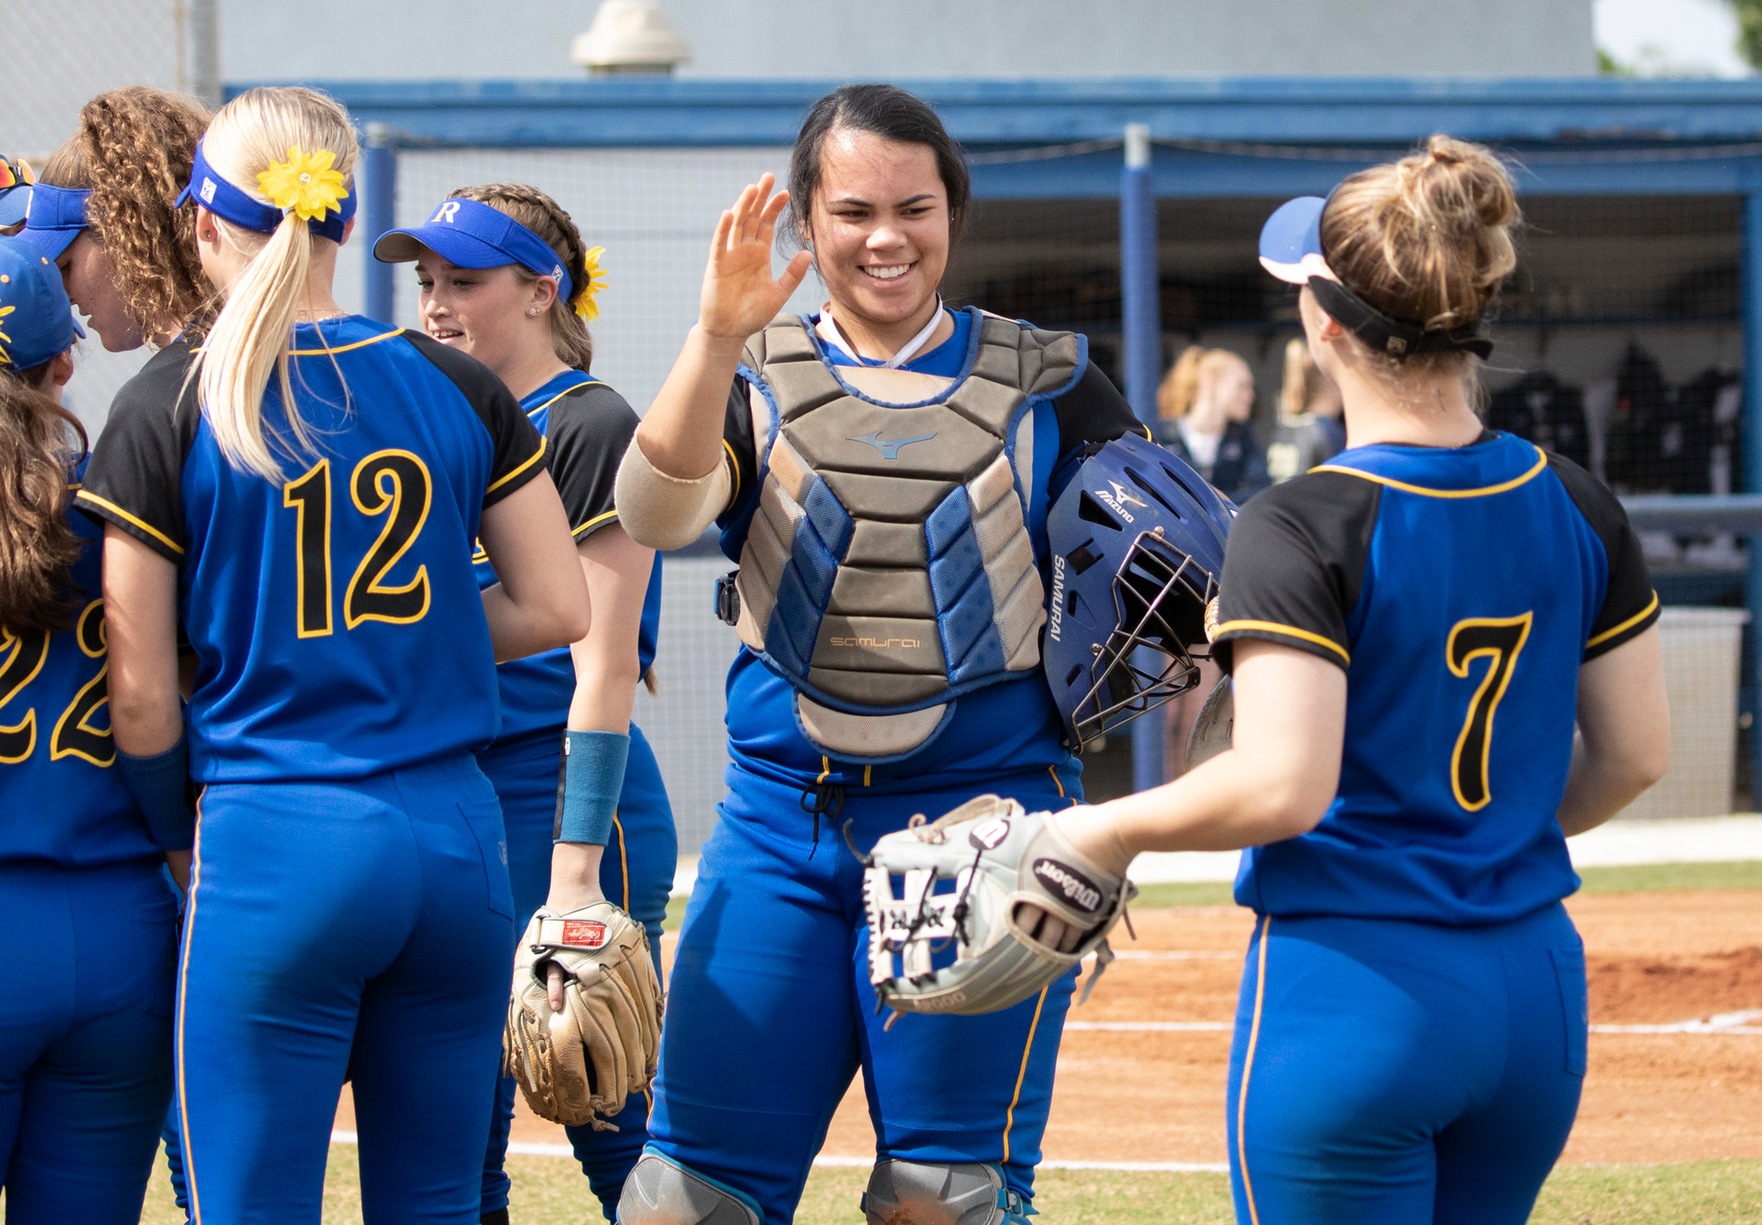 IRSC Softball Goes to 12-0 with Two Wins Over South Florida State